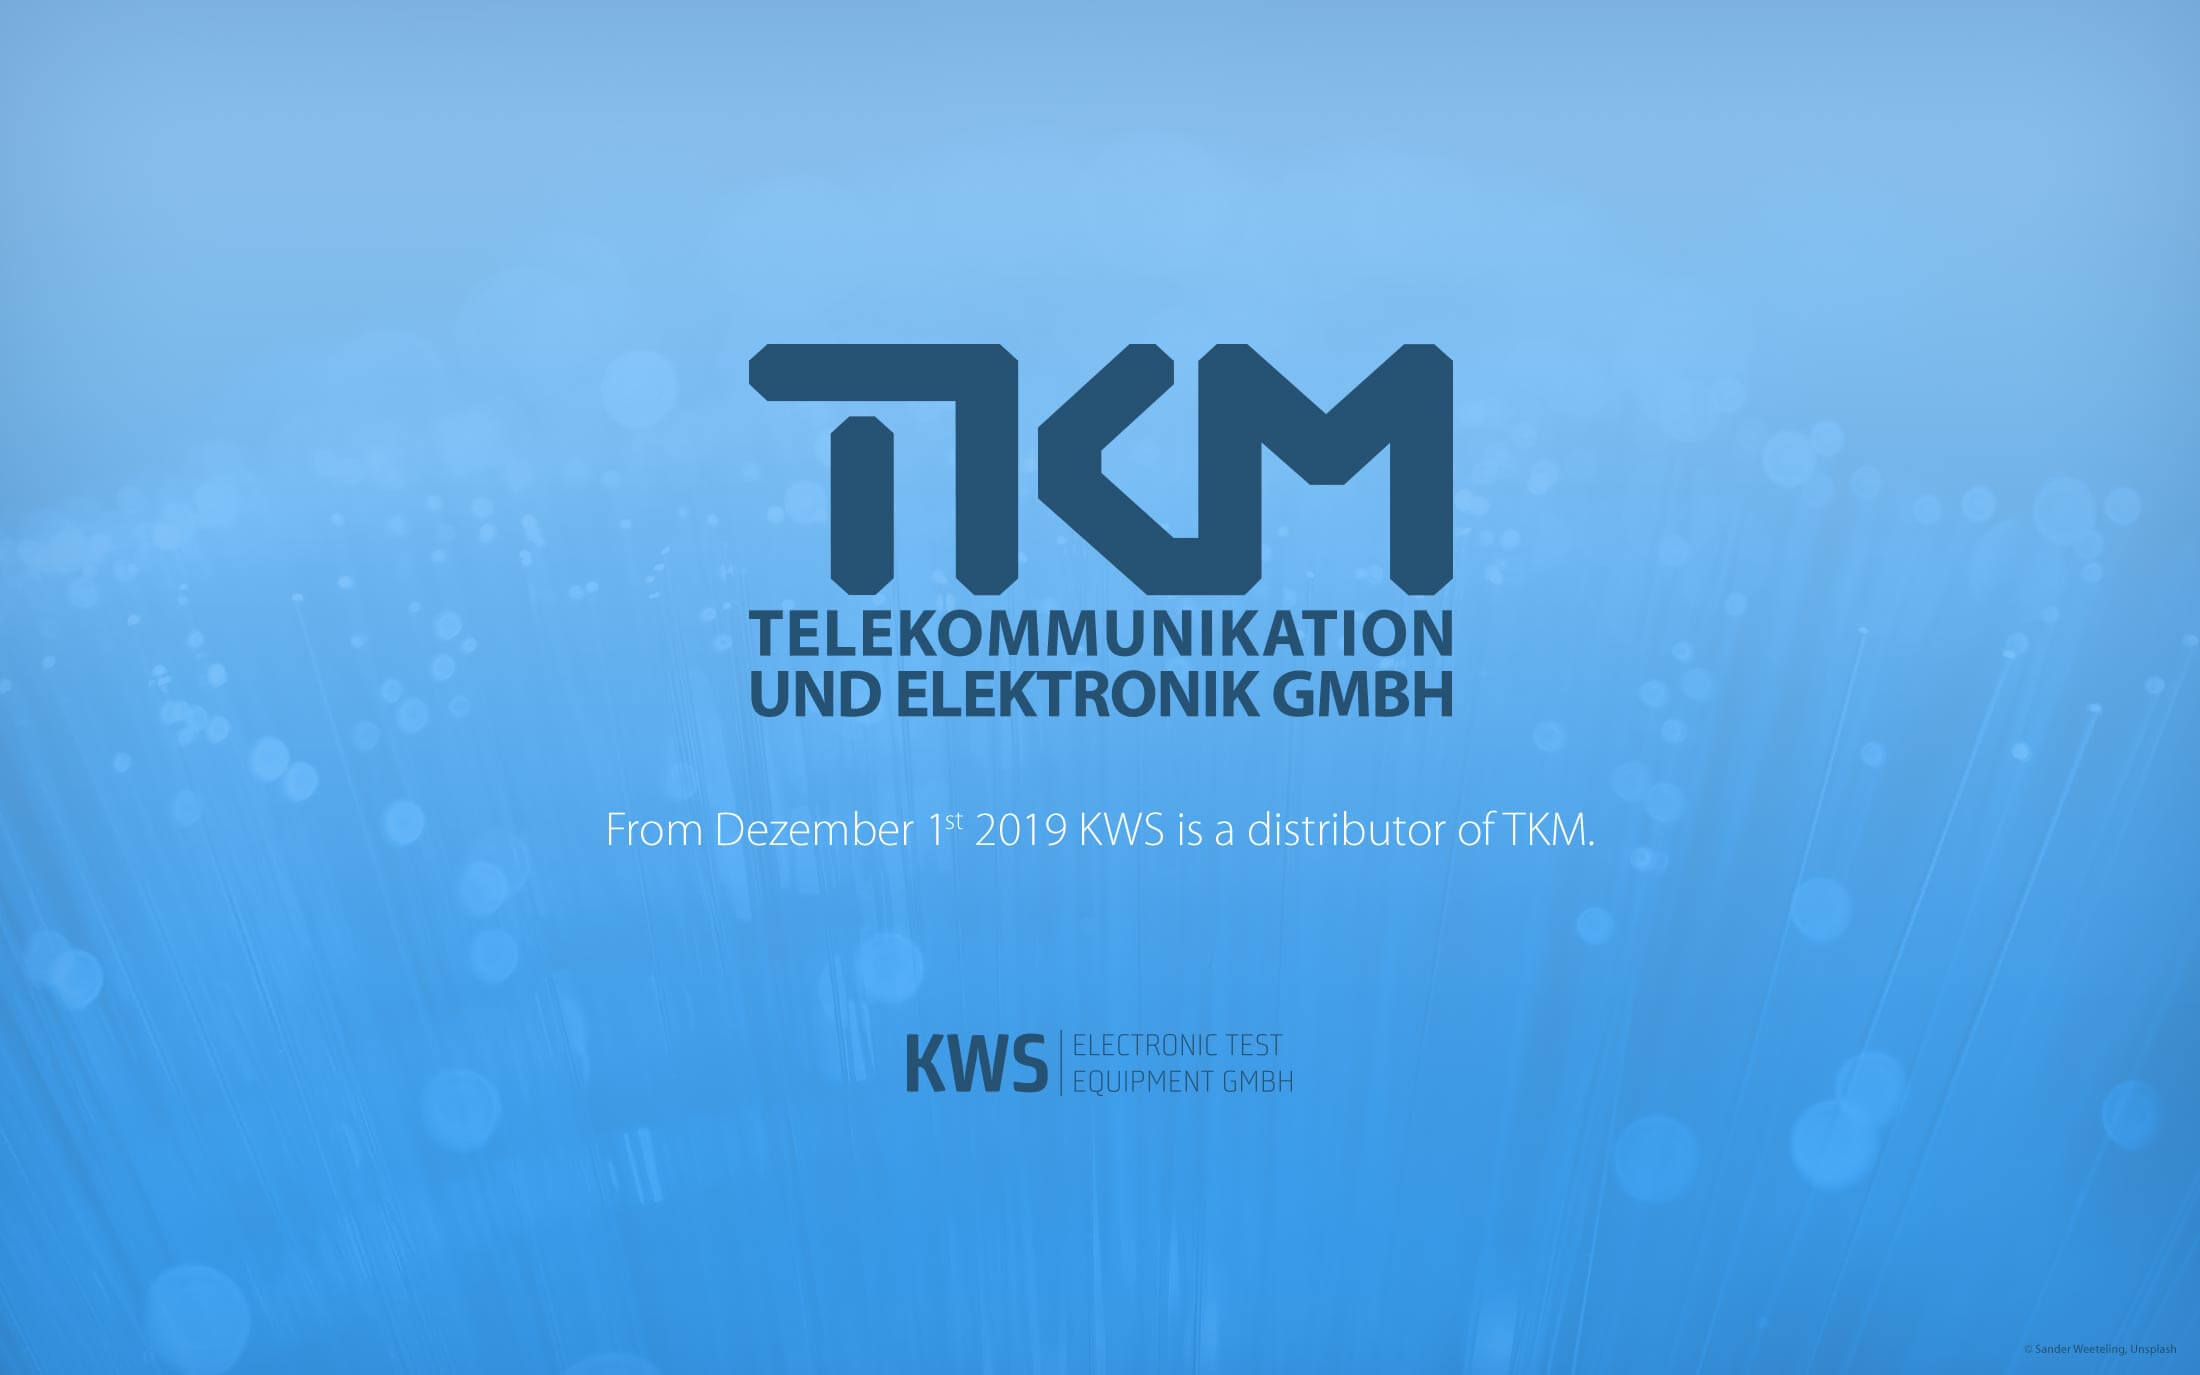 KWS Electronic News 2019: We are now a distributor of TKM